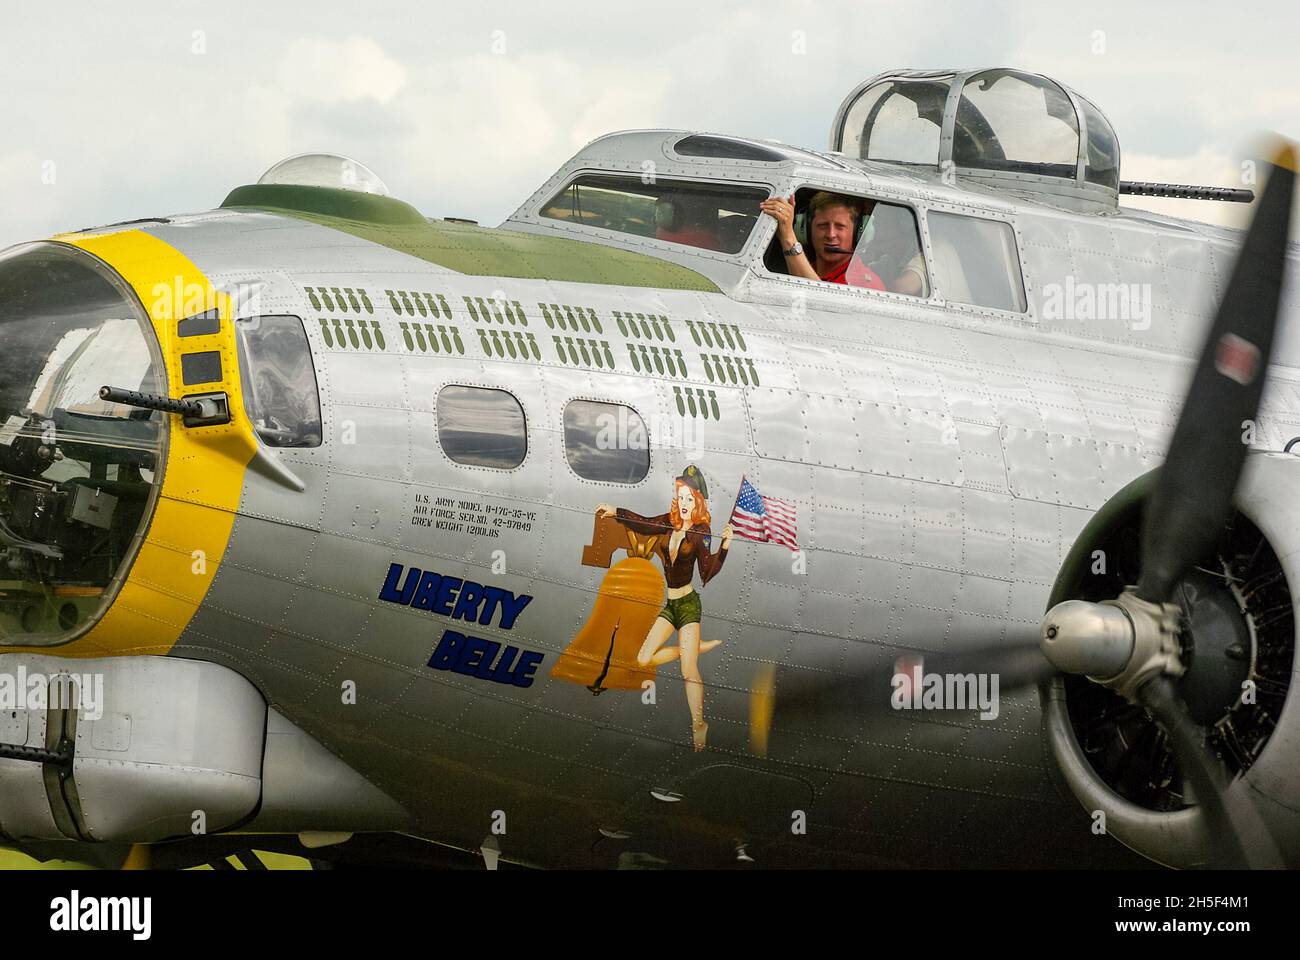 Second World War Boeing B-17 Flying Fortress named Liberty Belle with female figure nose art. Pin up artwork Stock Photo